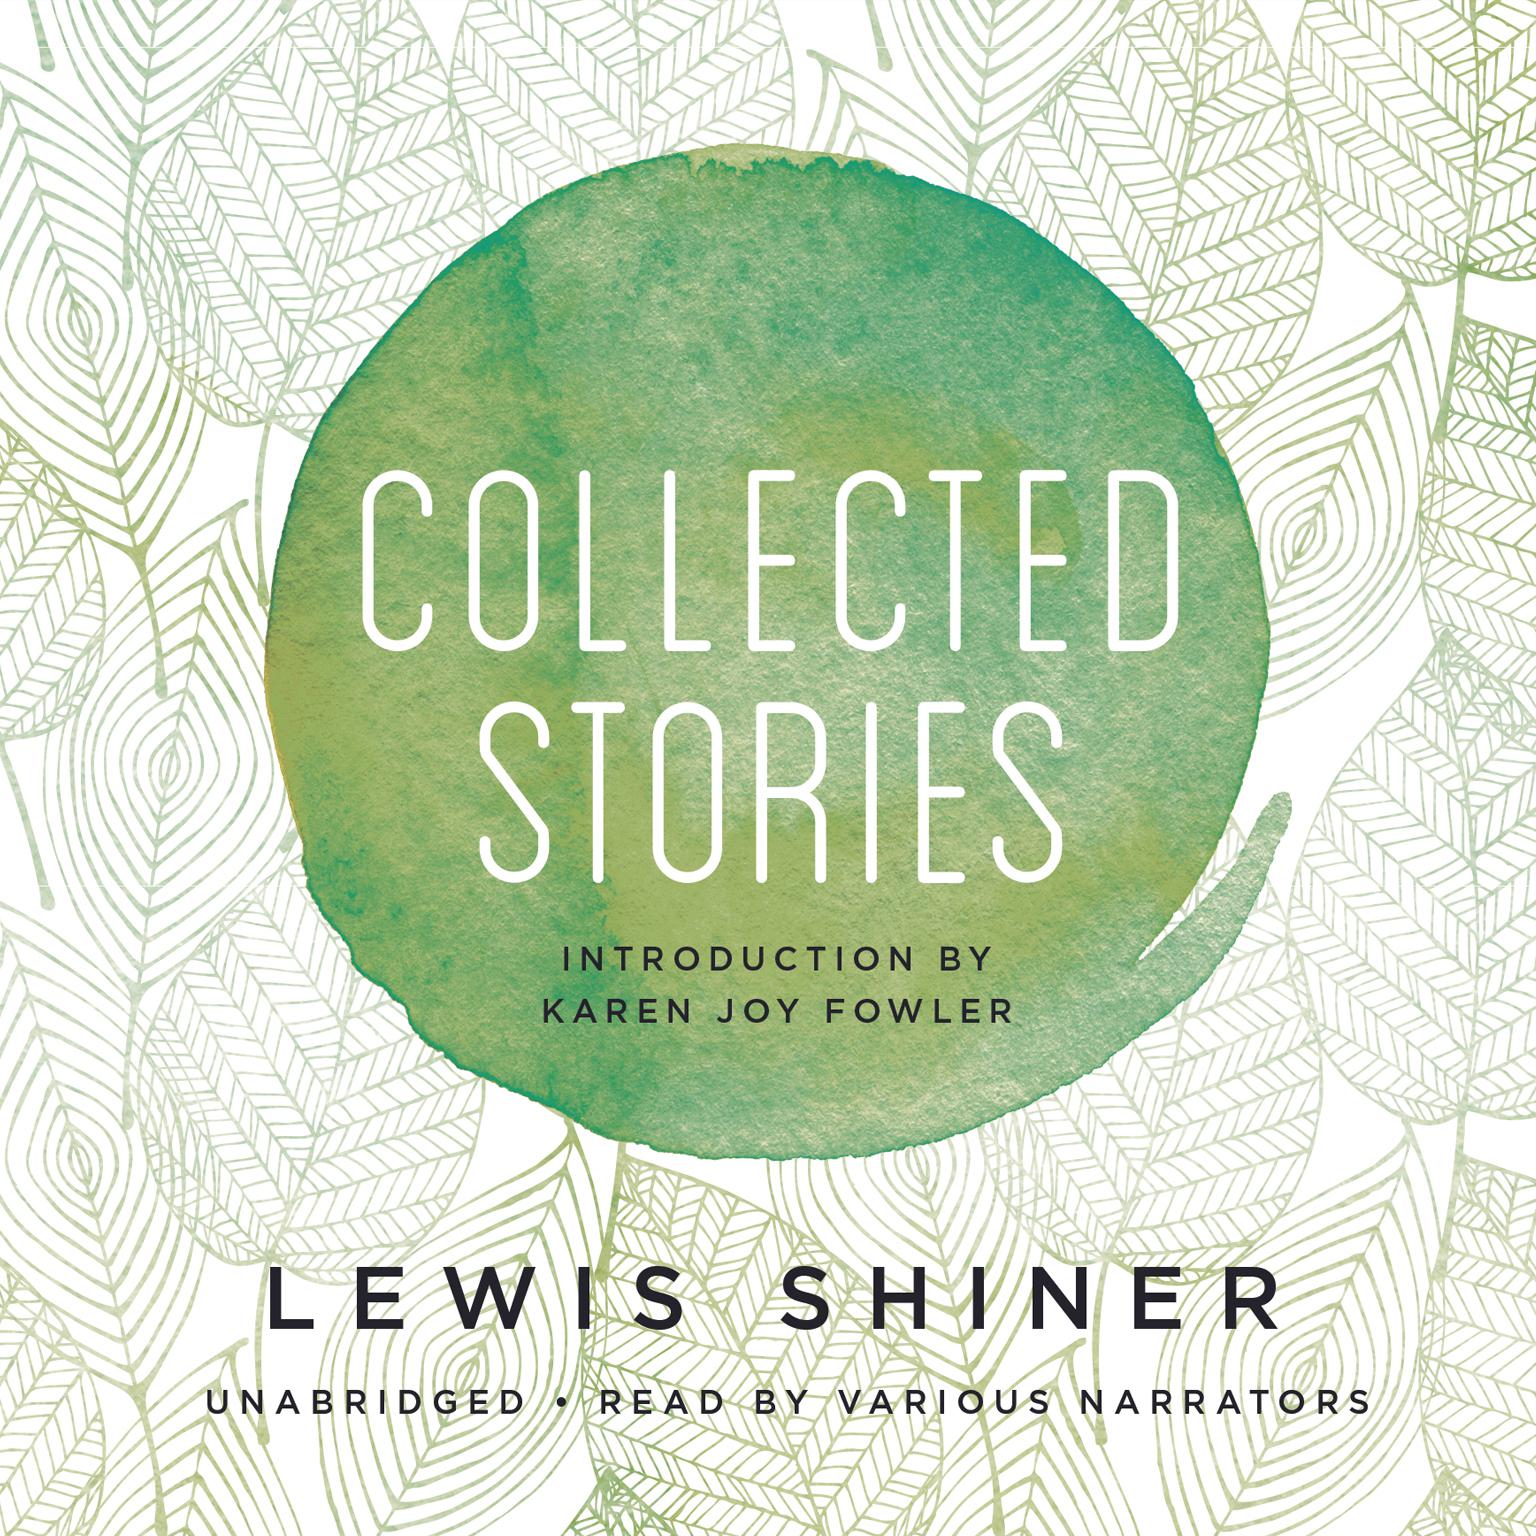 Collected Stories Audiobook, by Lewis Shiner